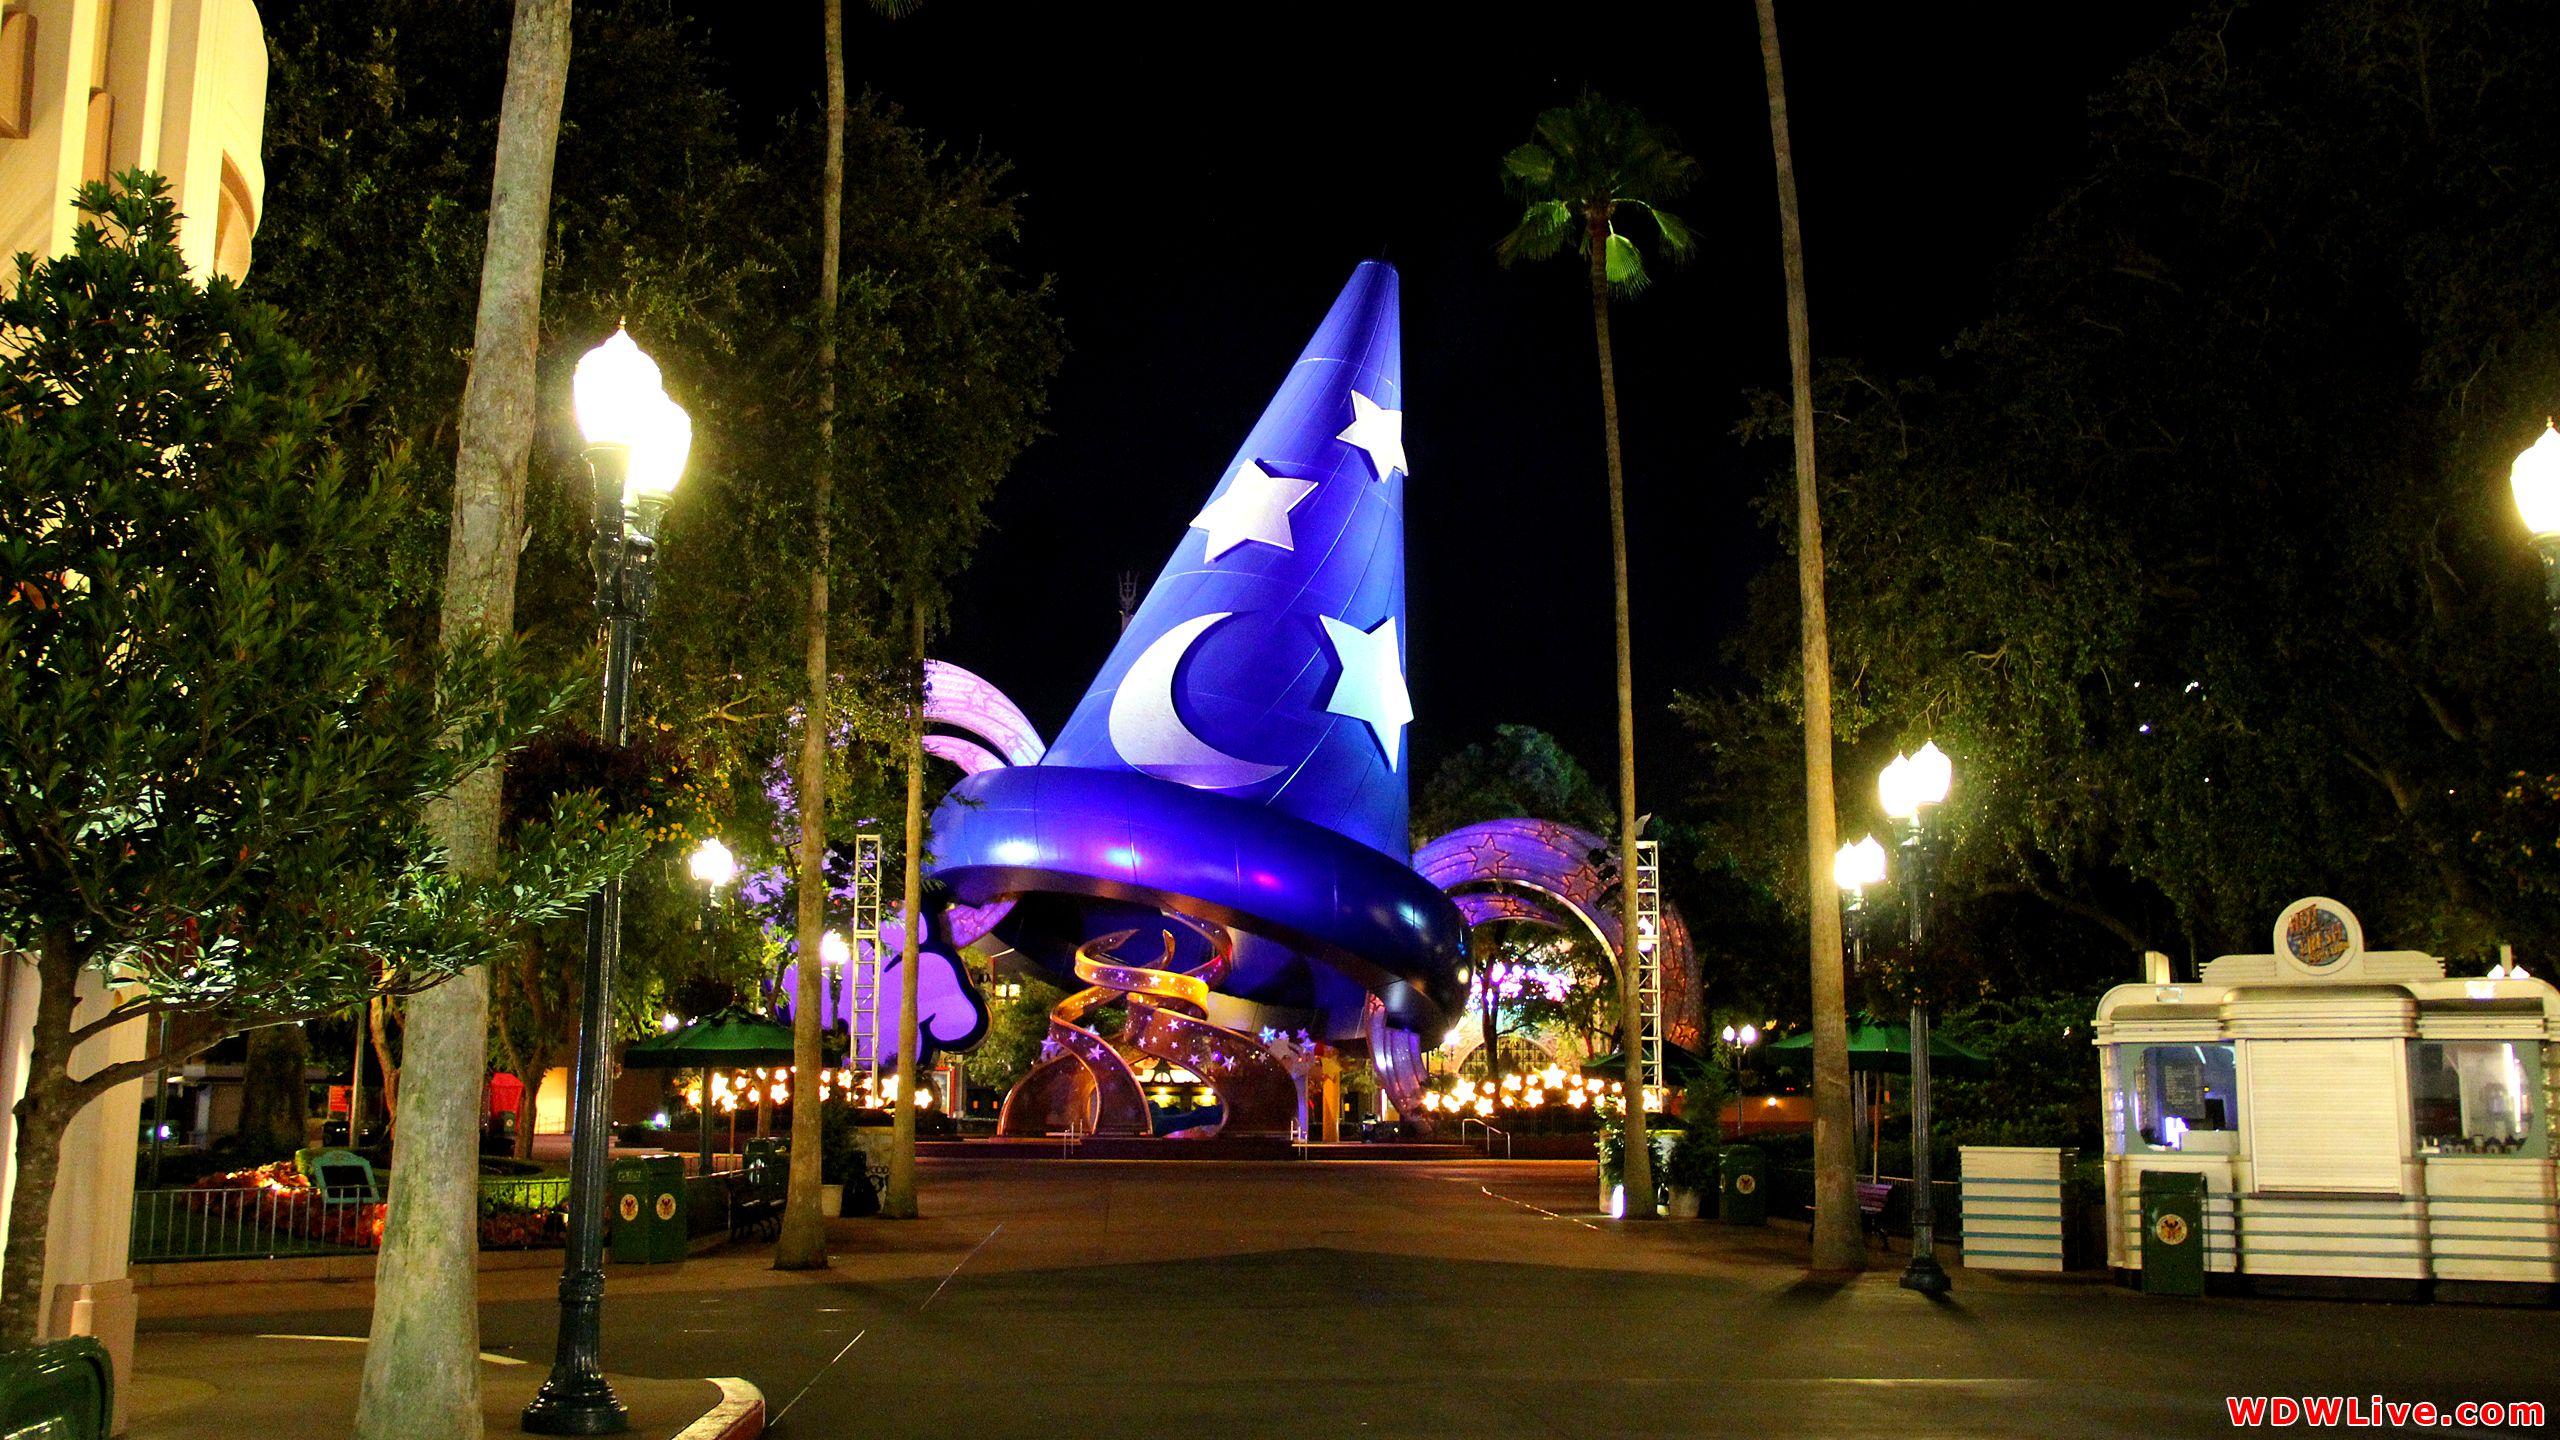 The Sorcerer's Hat: Empty nighttime view of The Sorcerer's Hat at